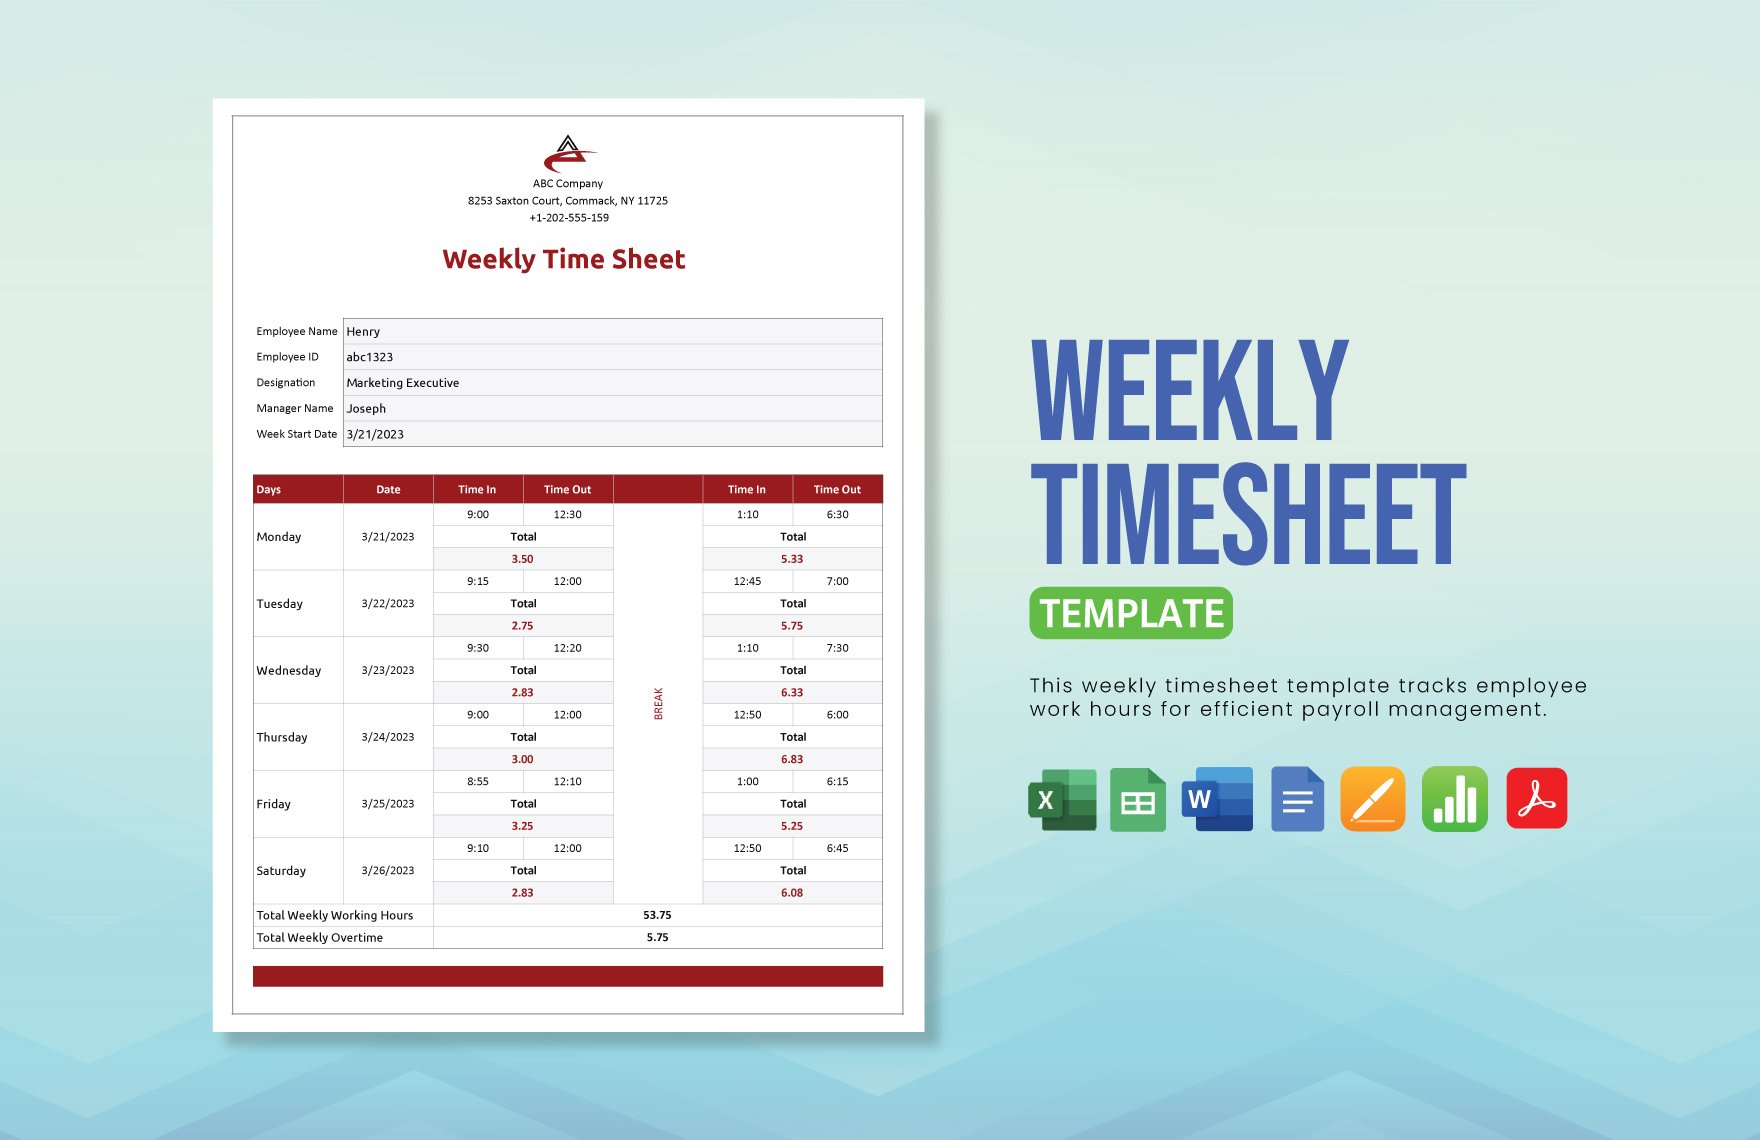 Weekly Timesheet Template in Word, Excel, PDF, Apple Pages, Apple Numbers